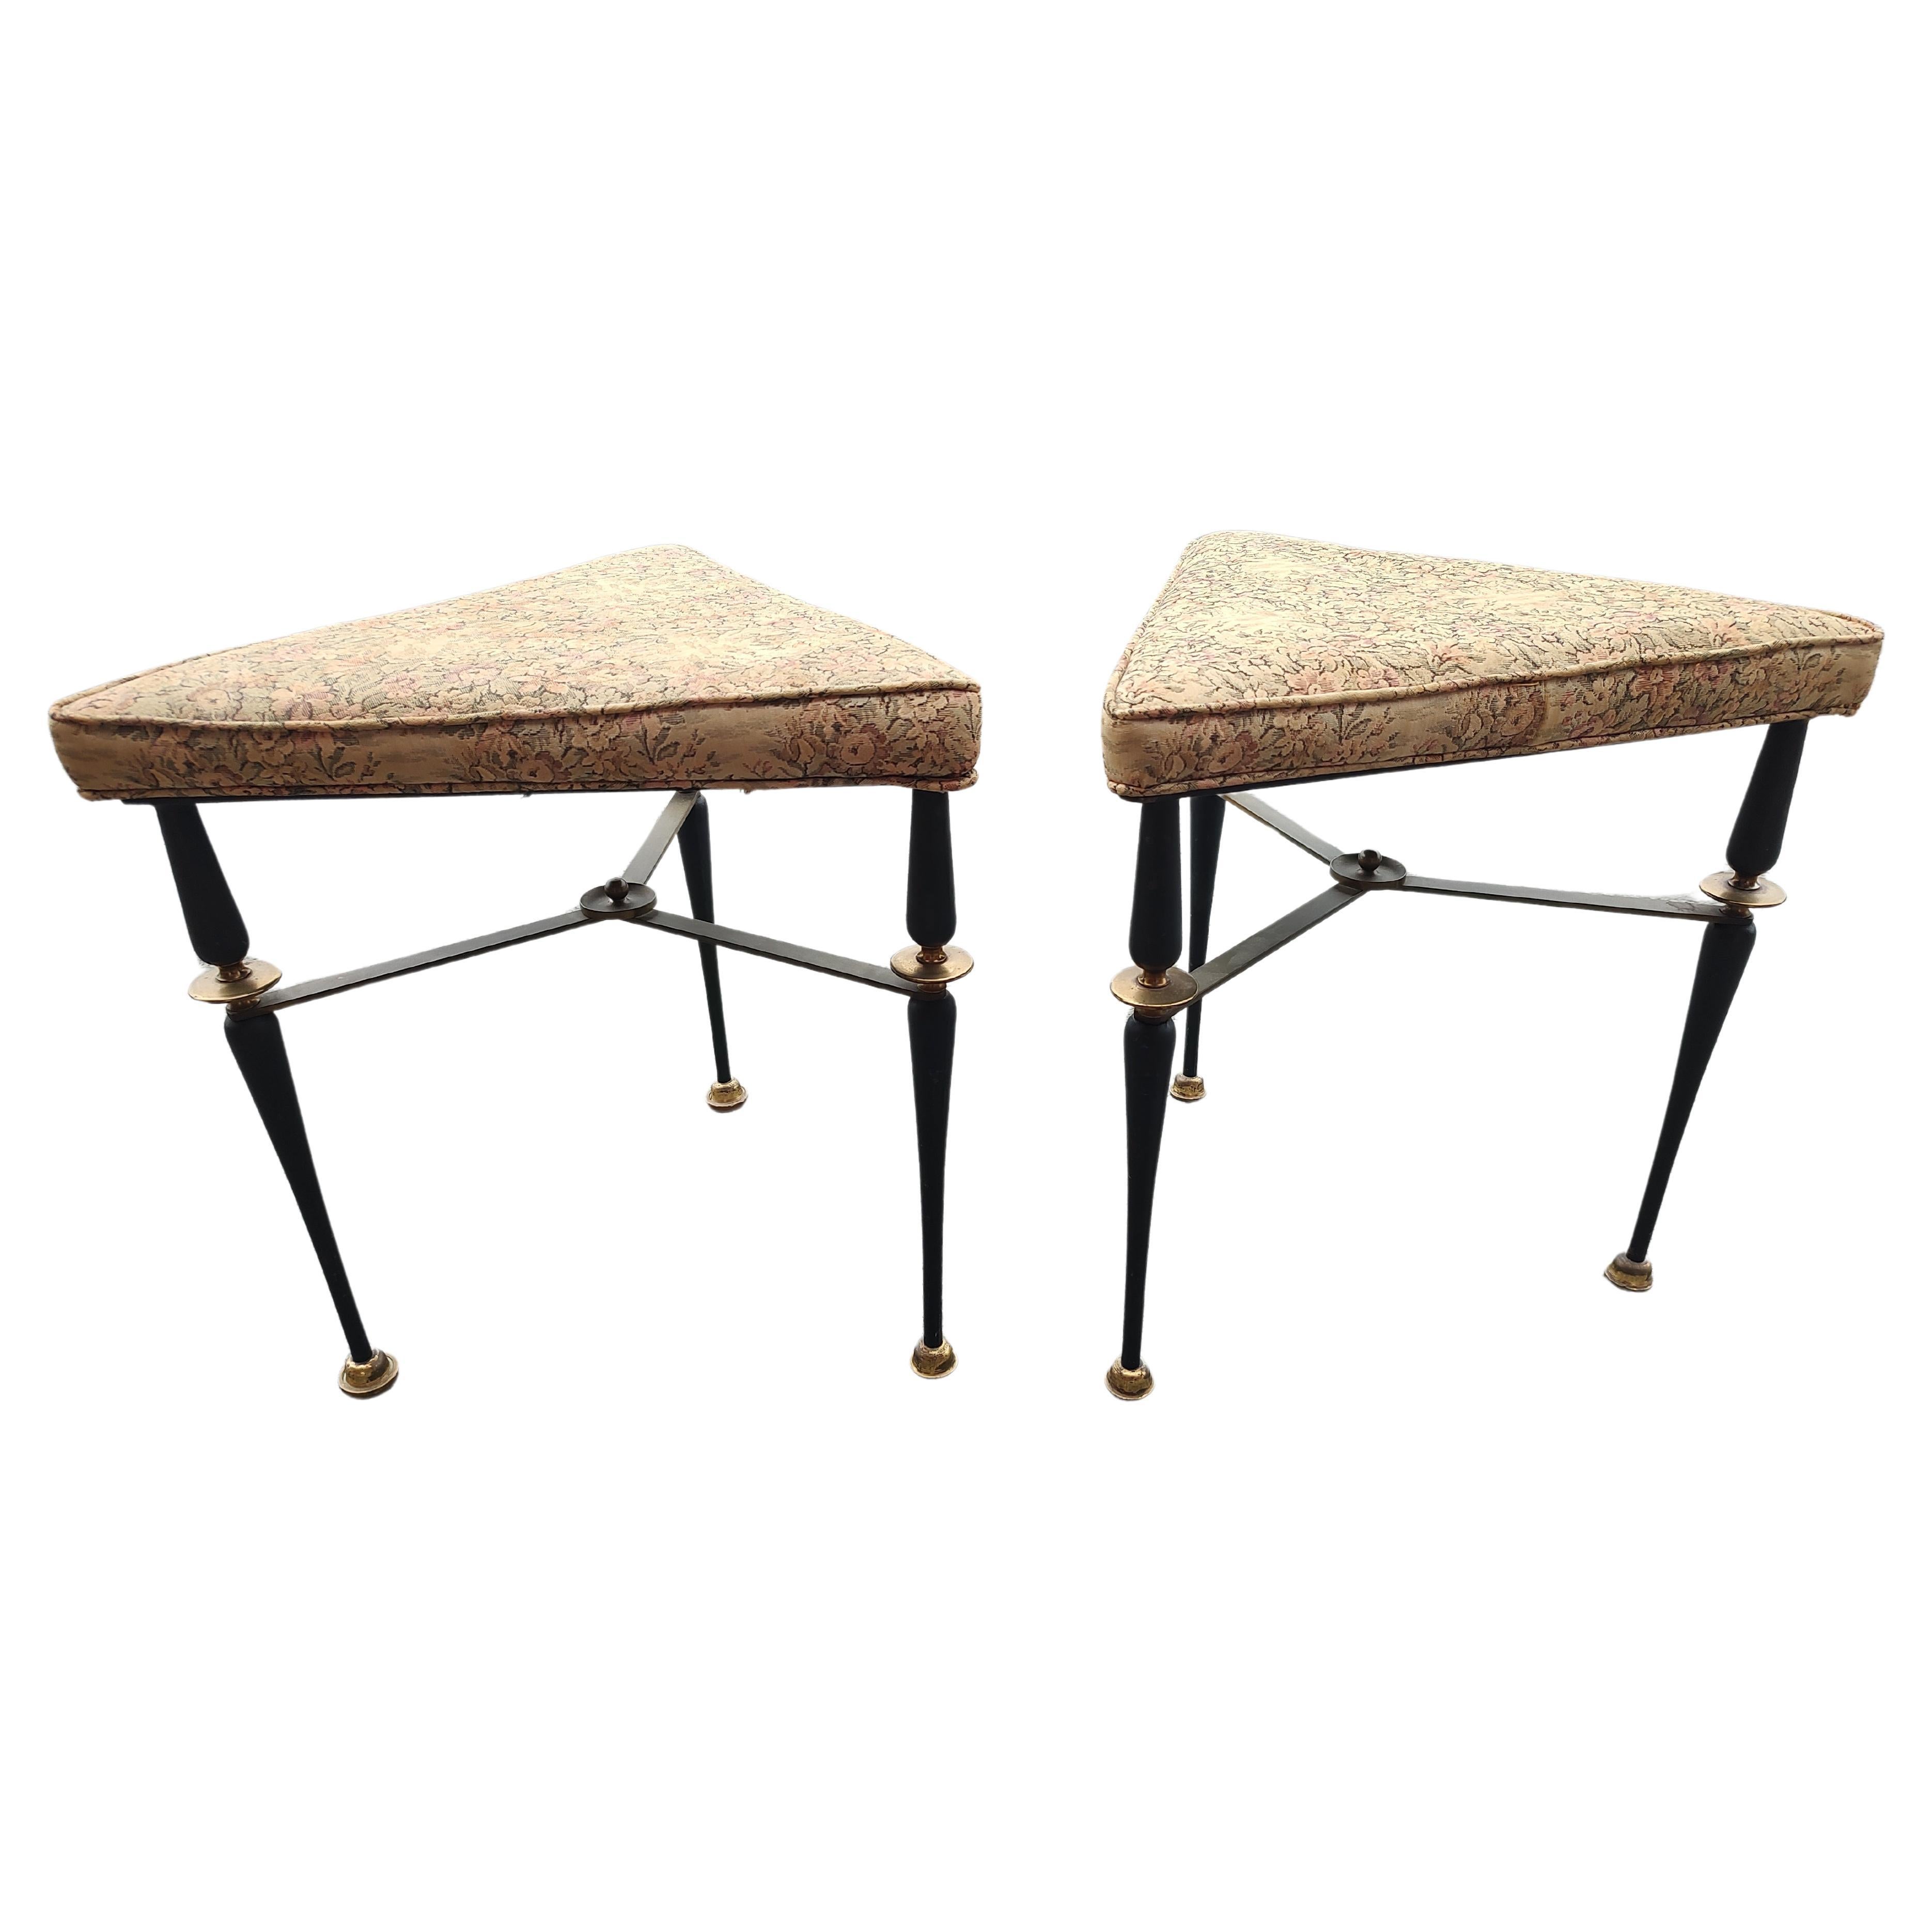 Mid-20th Century Pair of Triangular Benches Brass & Iron Attributed to Robs Johns Gibbons C1955